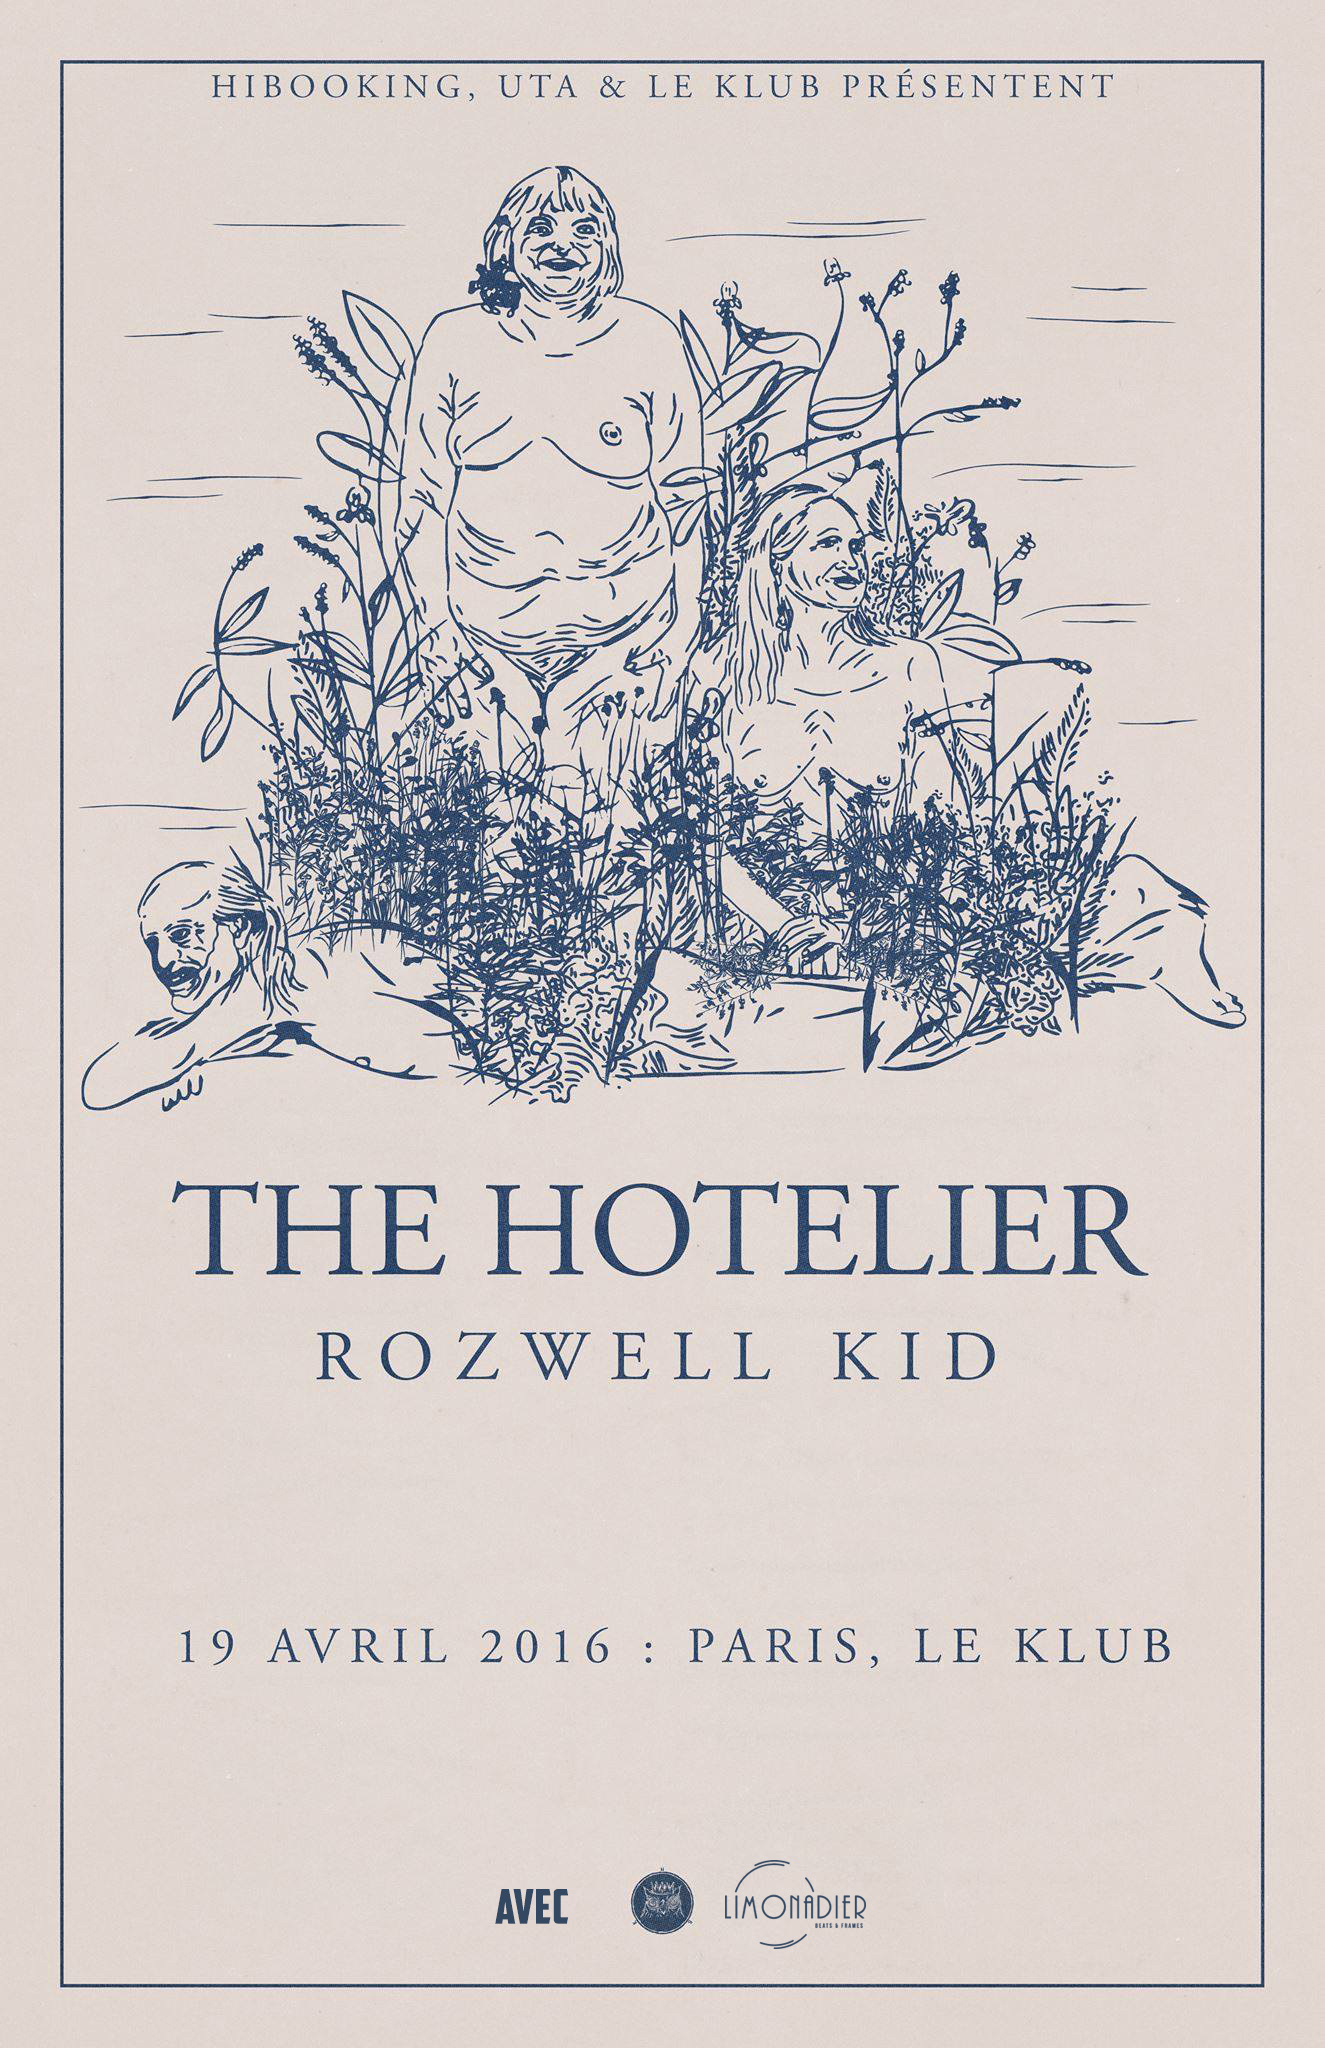 THE HOTELIER